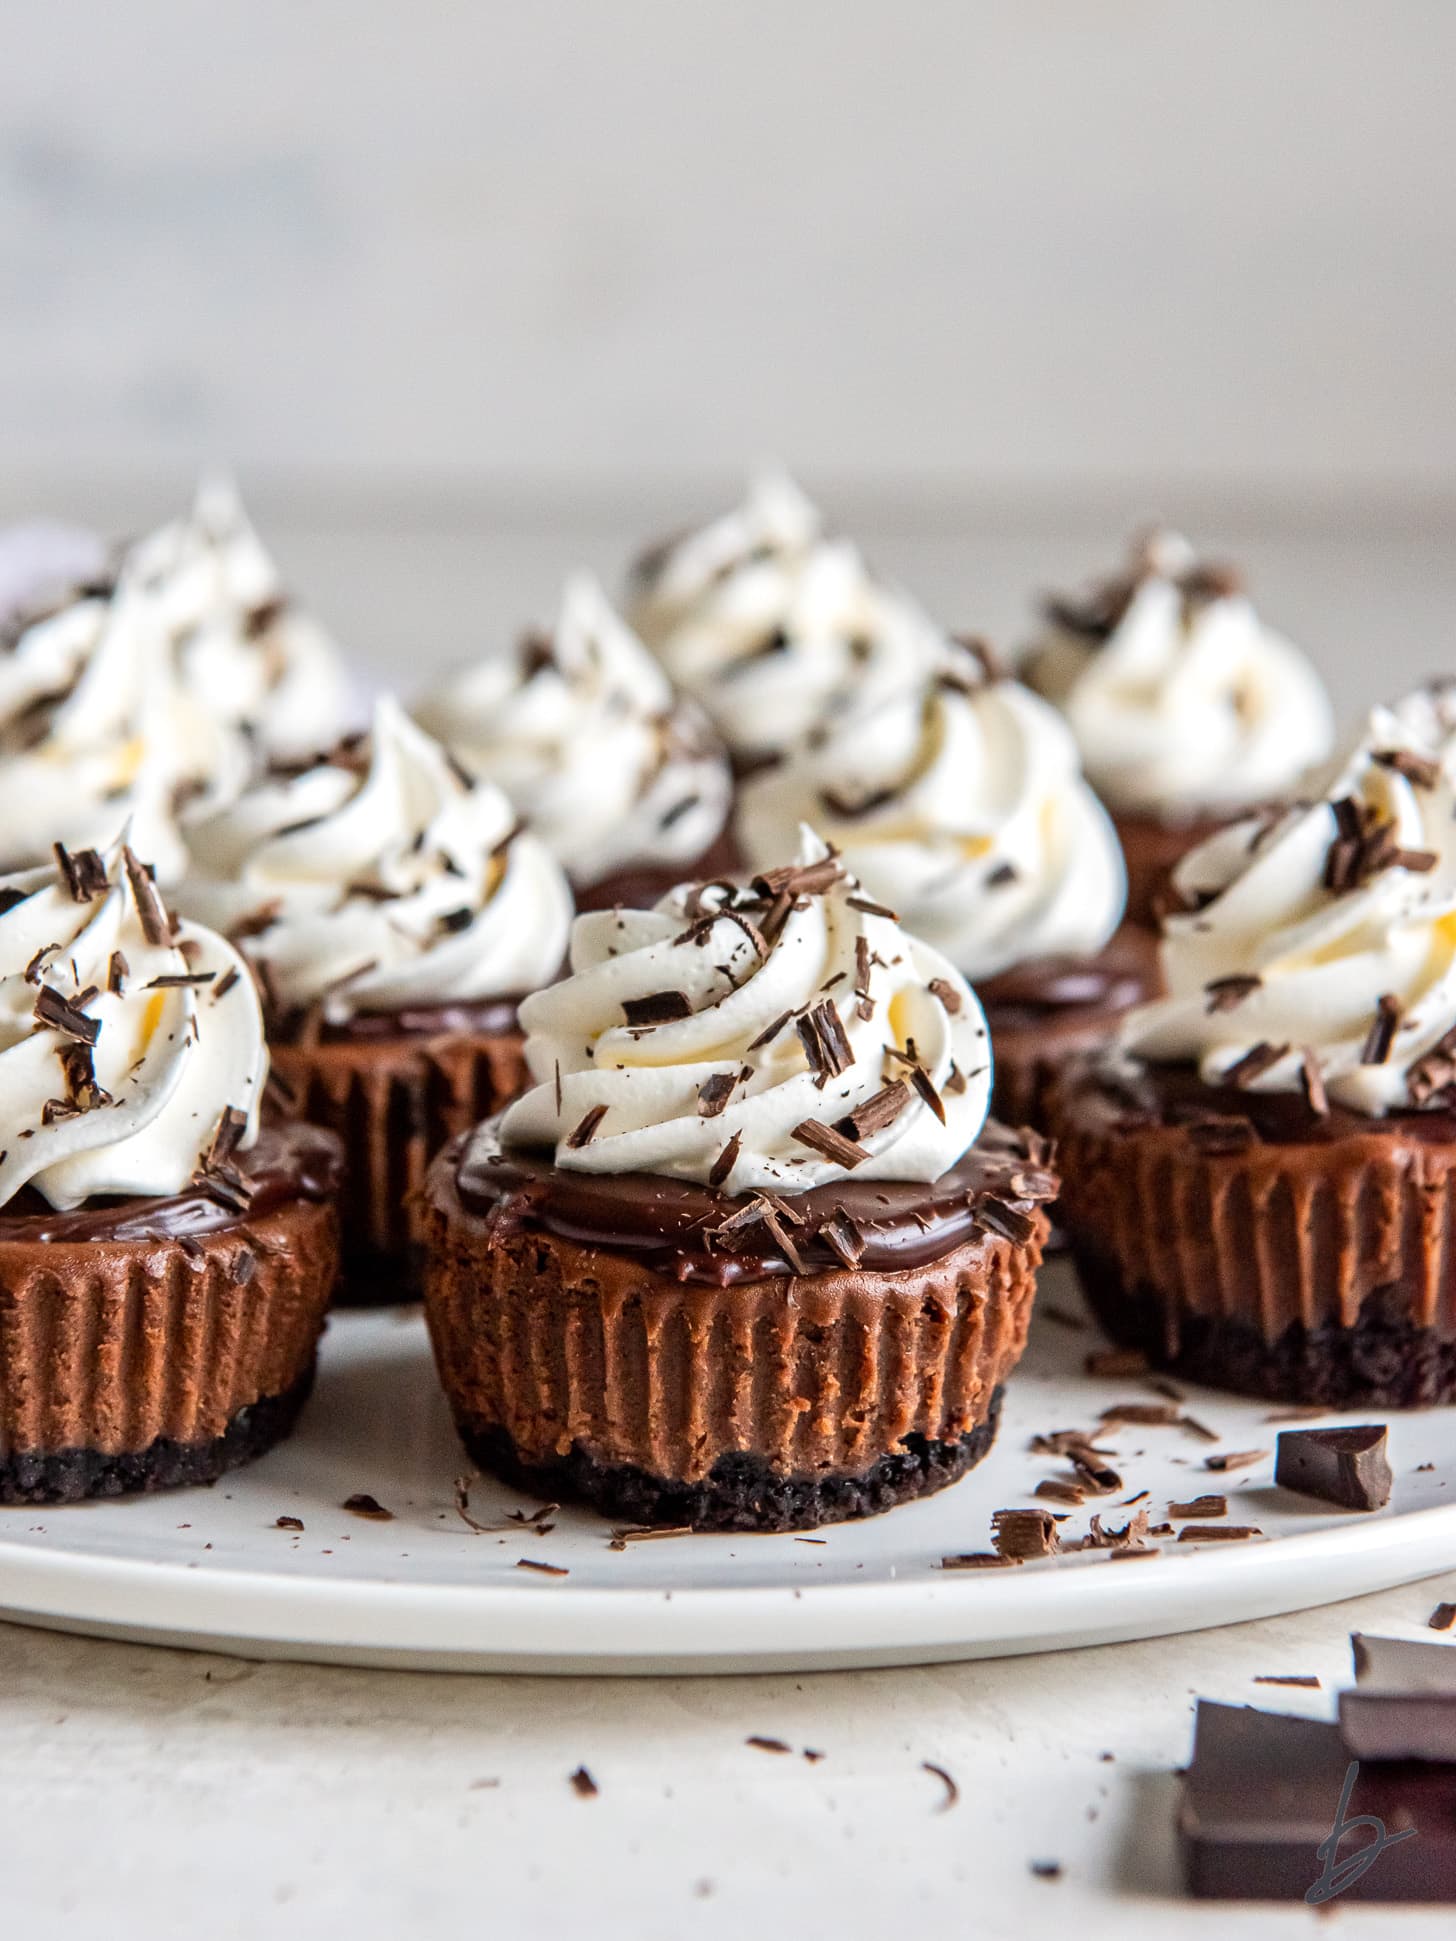 mini chocolate cheesecakes topped with whipped cream and chocolate shavings.